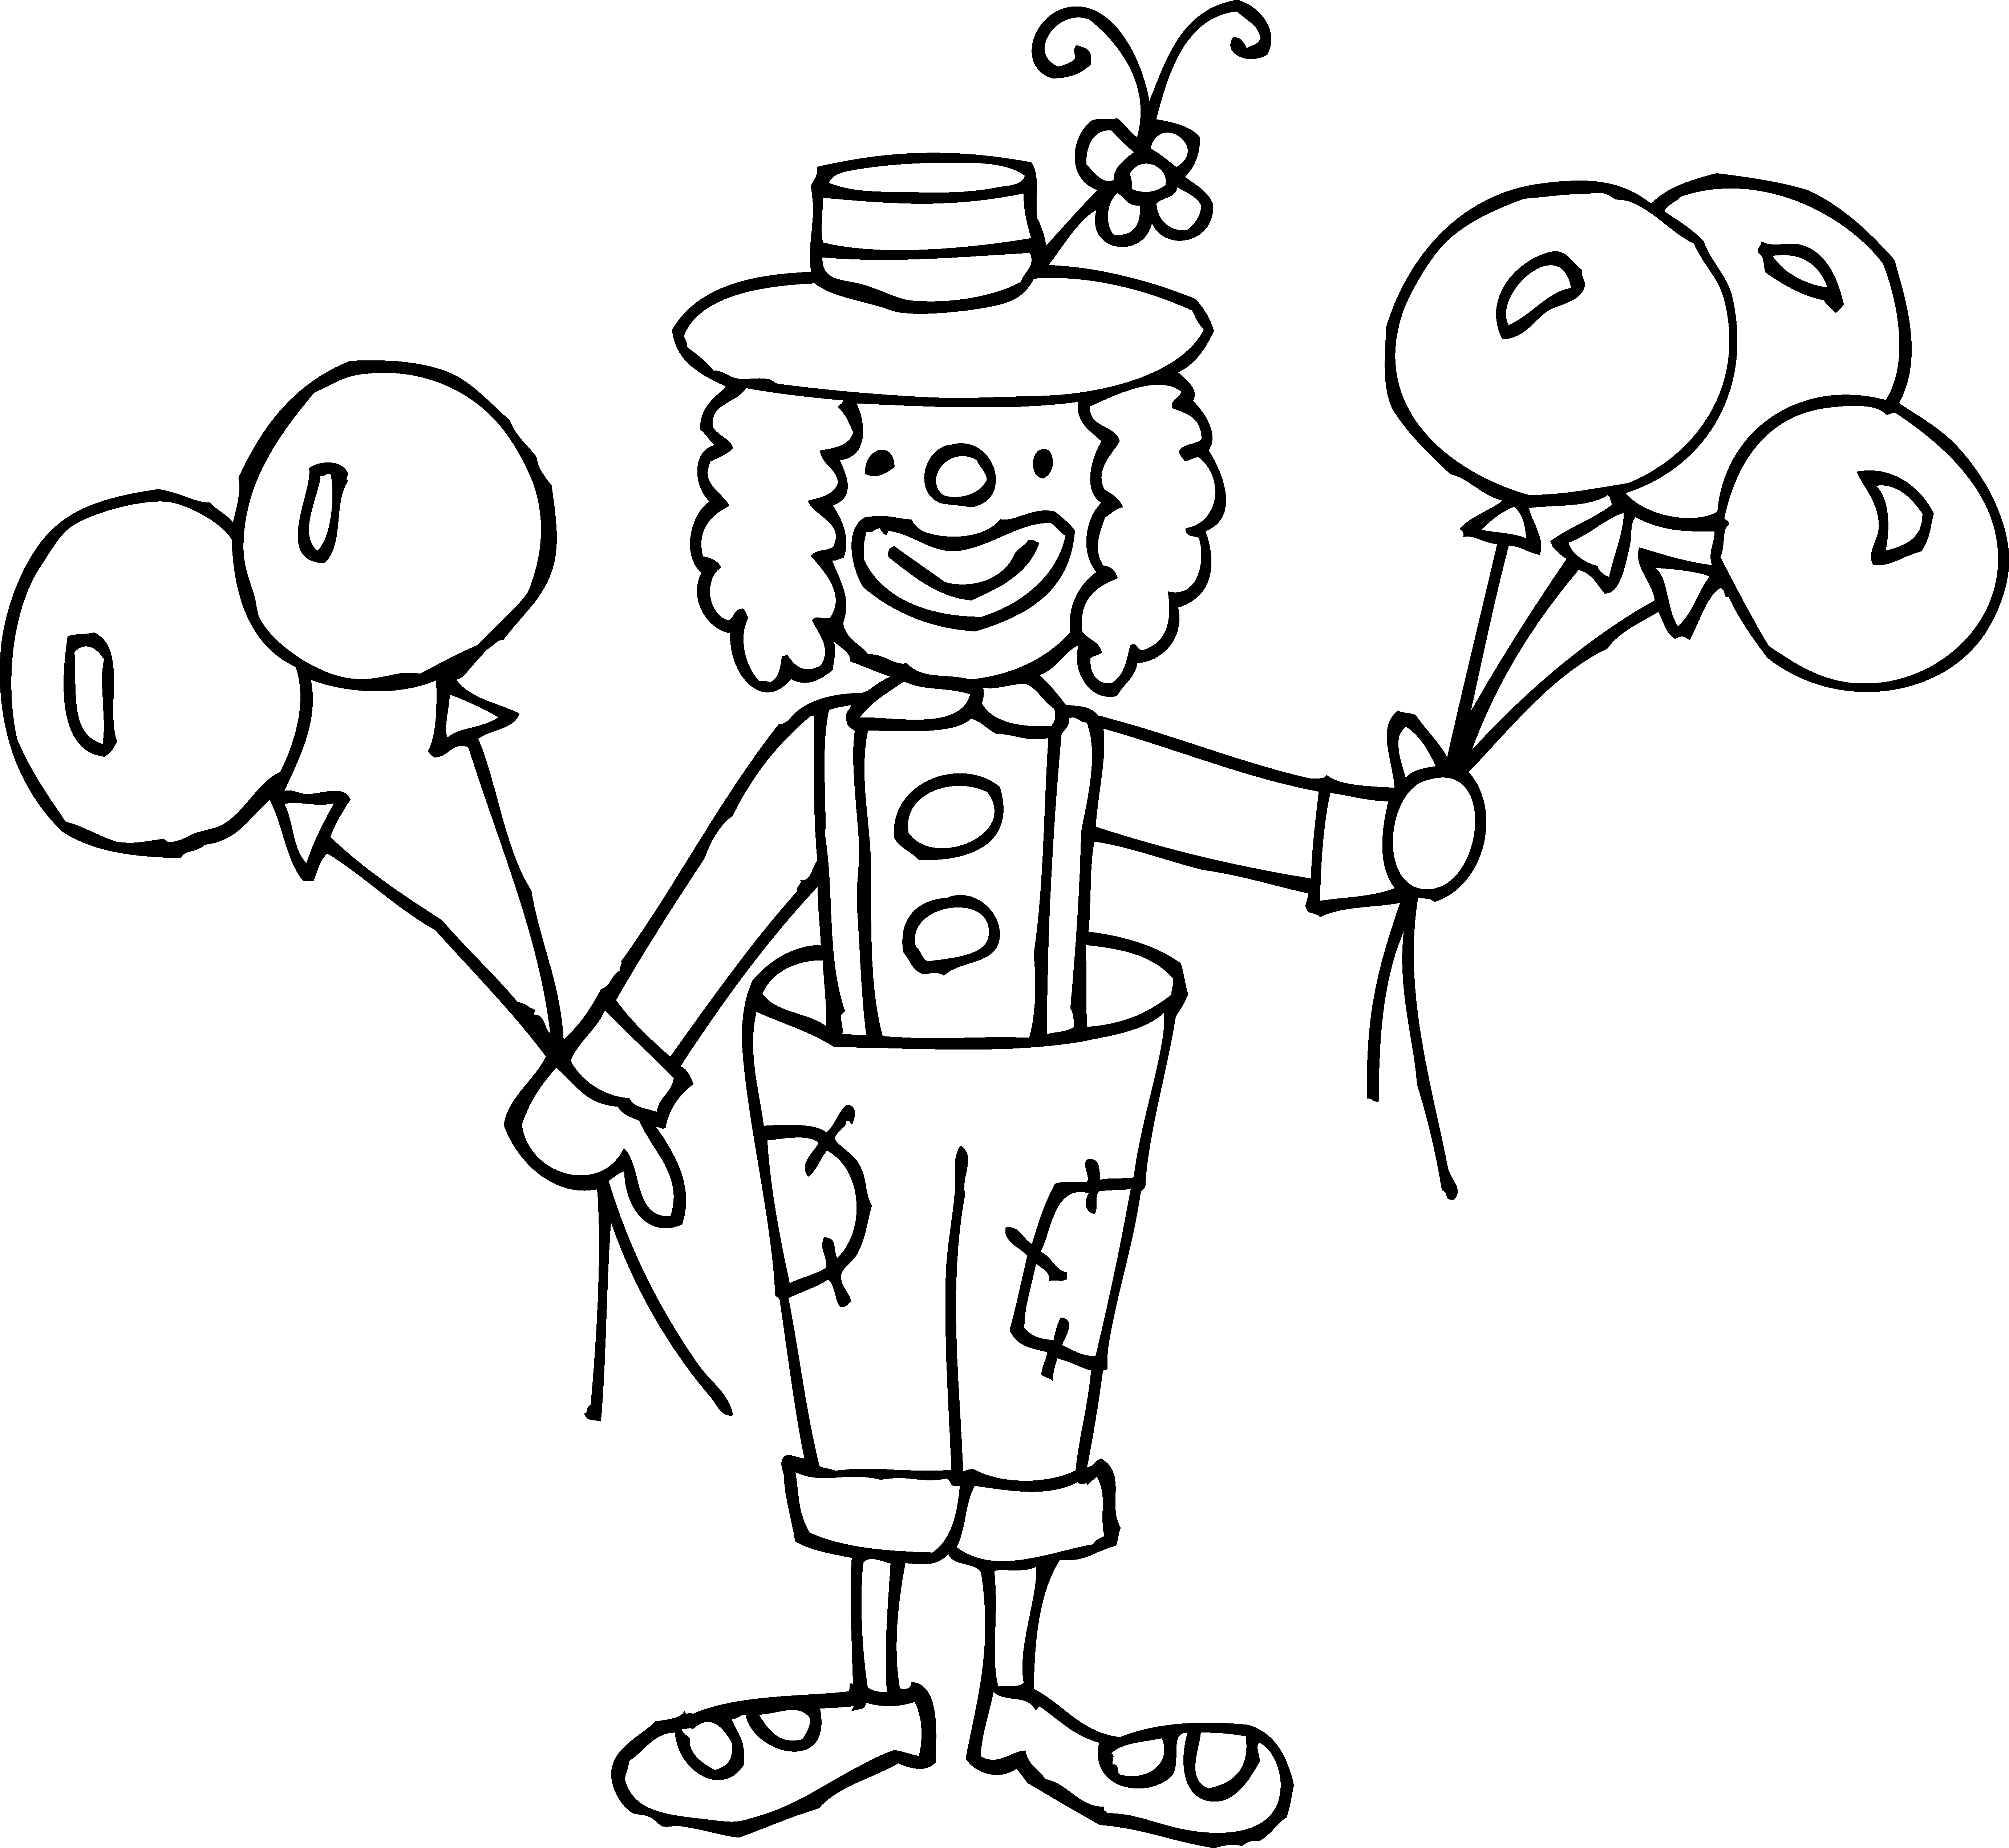 Silly Clown Coloring Page